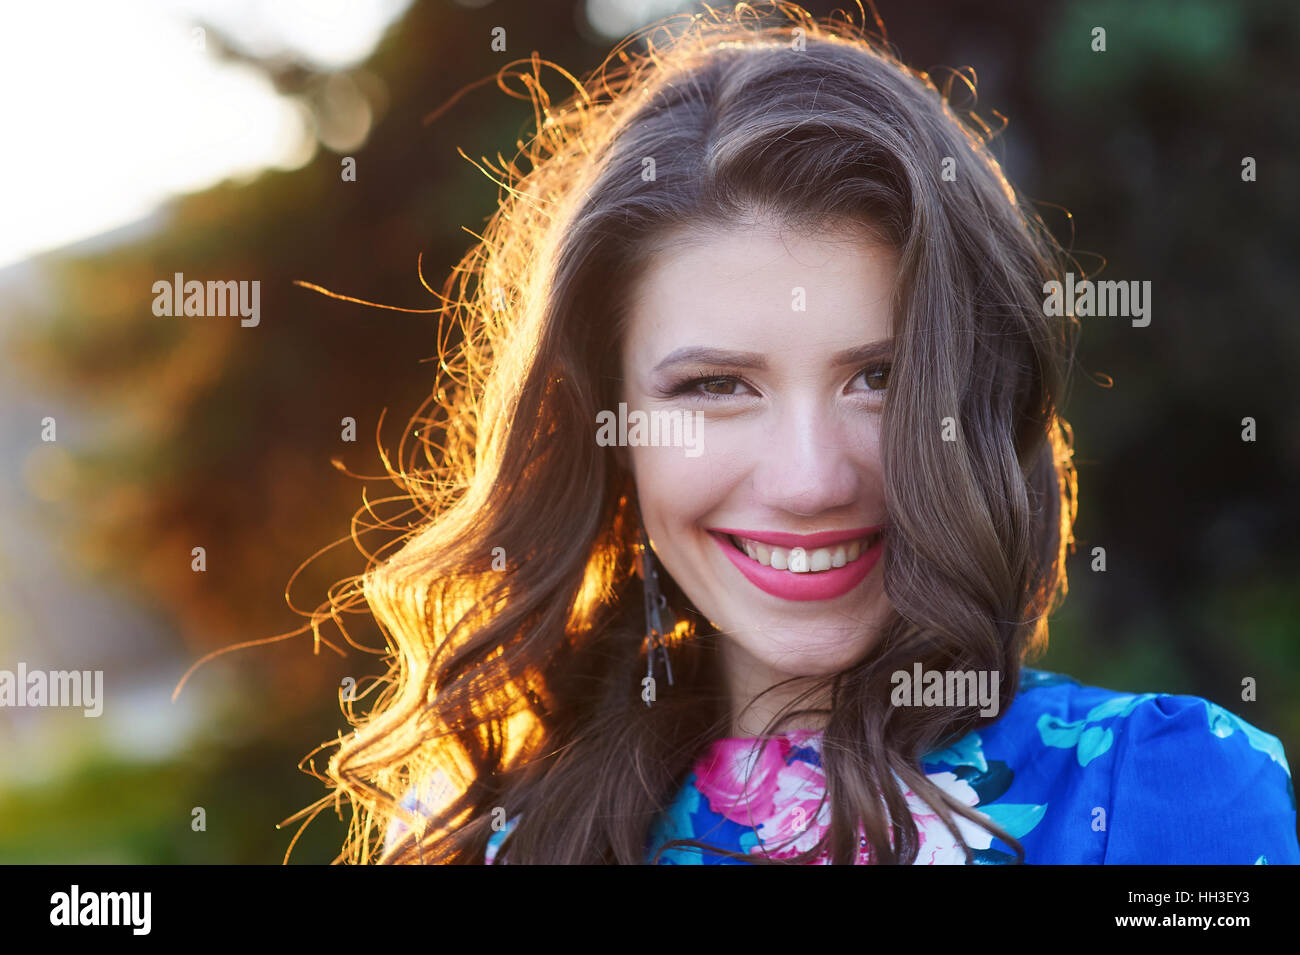 smiling young woman with make-up in the Park Stock Photo